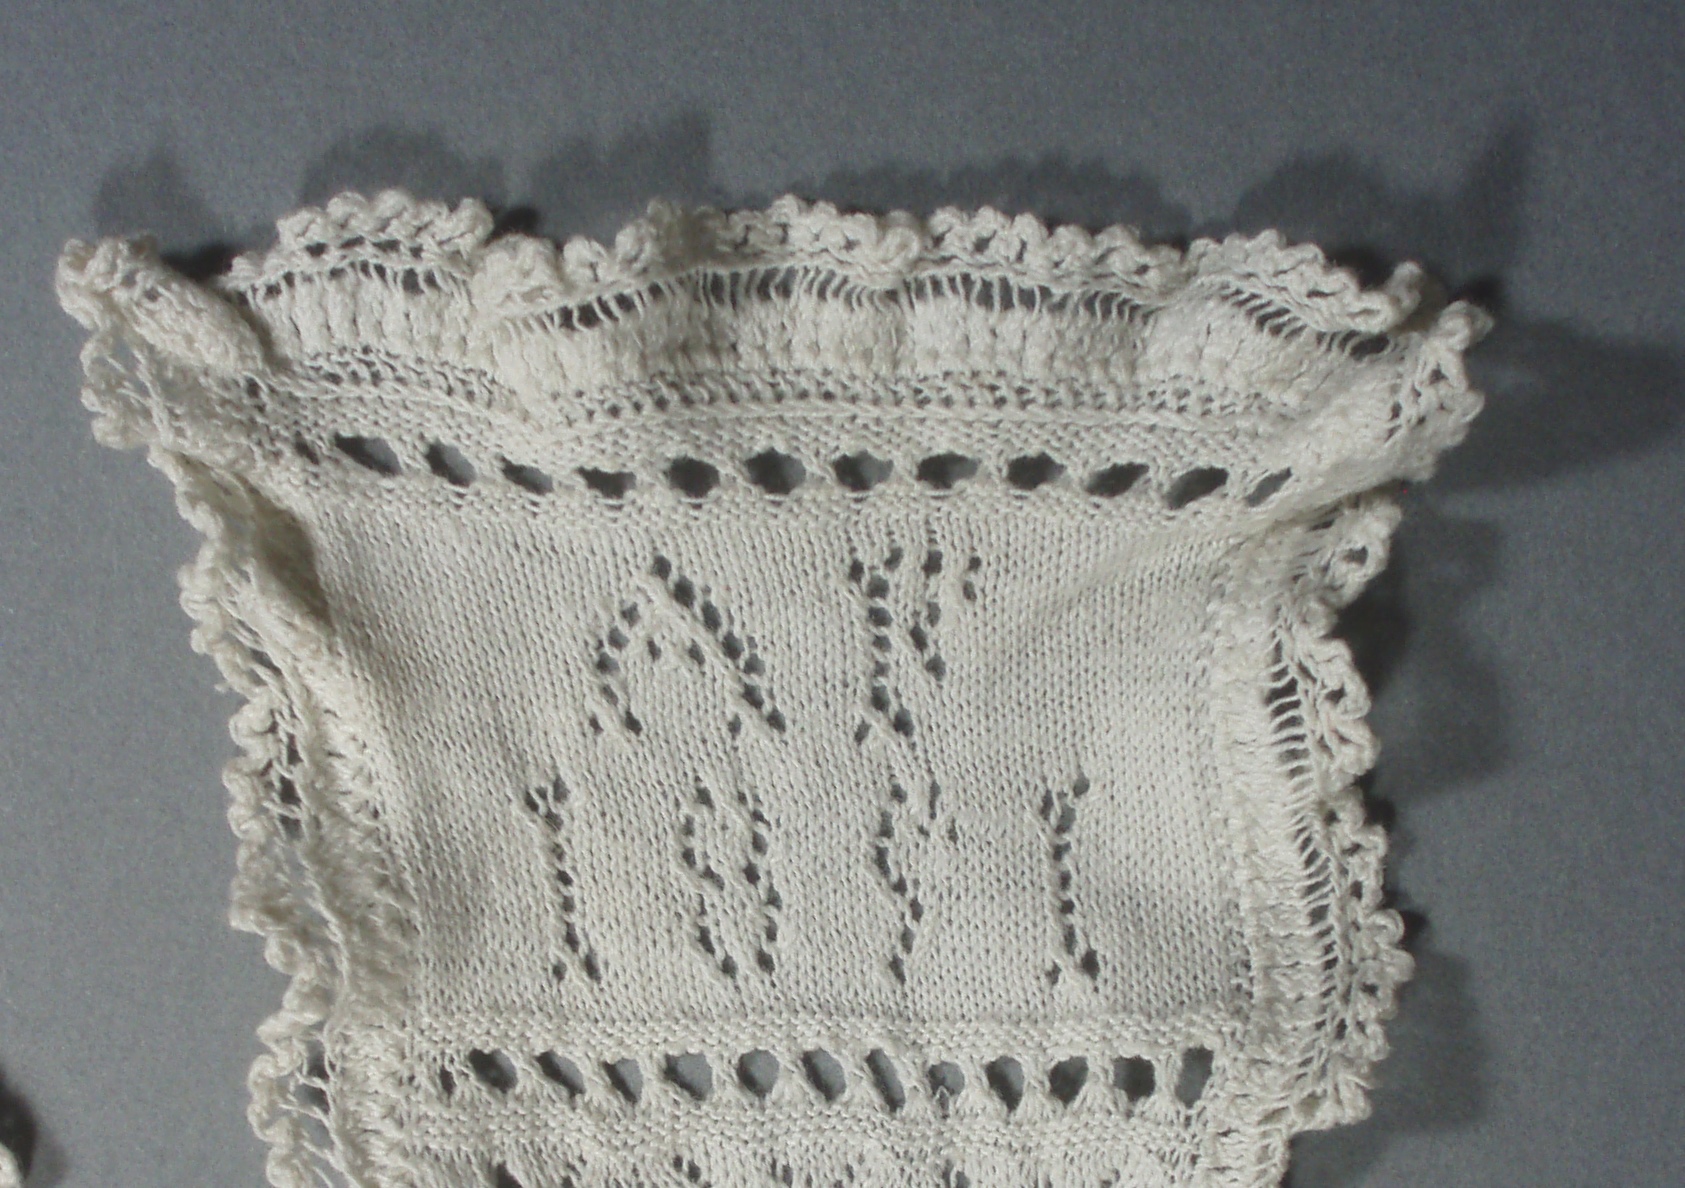 Detail showing the initials AF and the year 1891 knit into the sampler with openwork stitches.